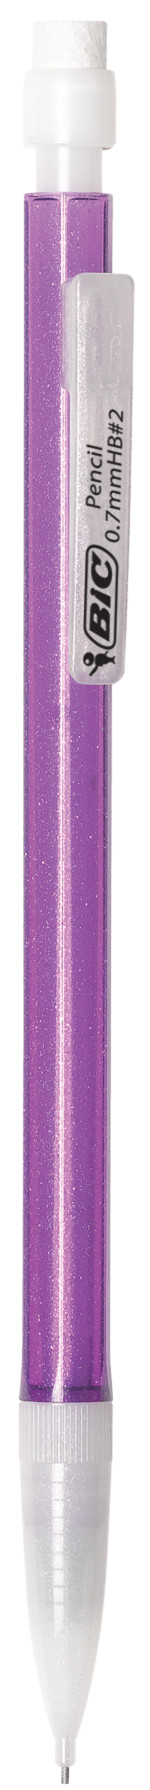 BIC Xtra-Sparkle No. 2 Mechanical Pencils with Erasers, Medium Point (0.7mm), 24 Pencils - image 5 of 7